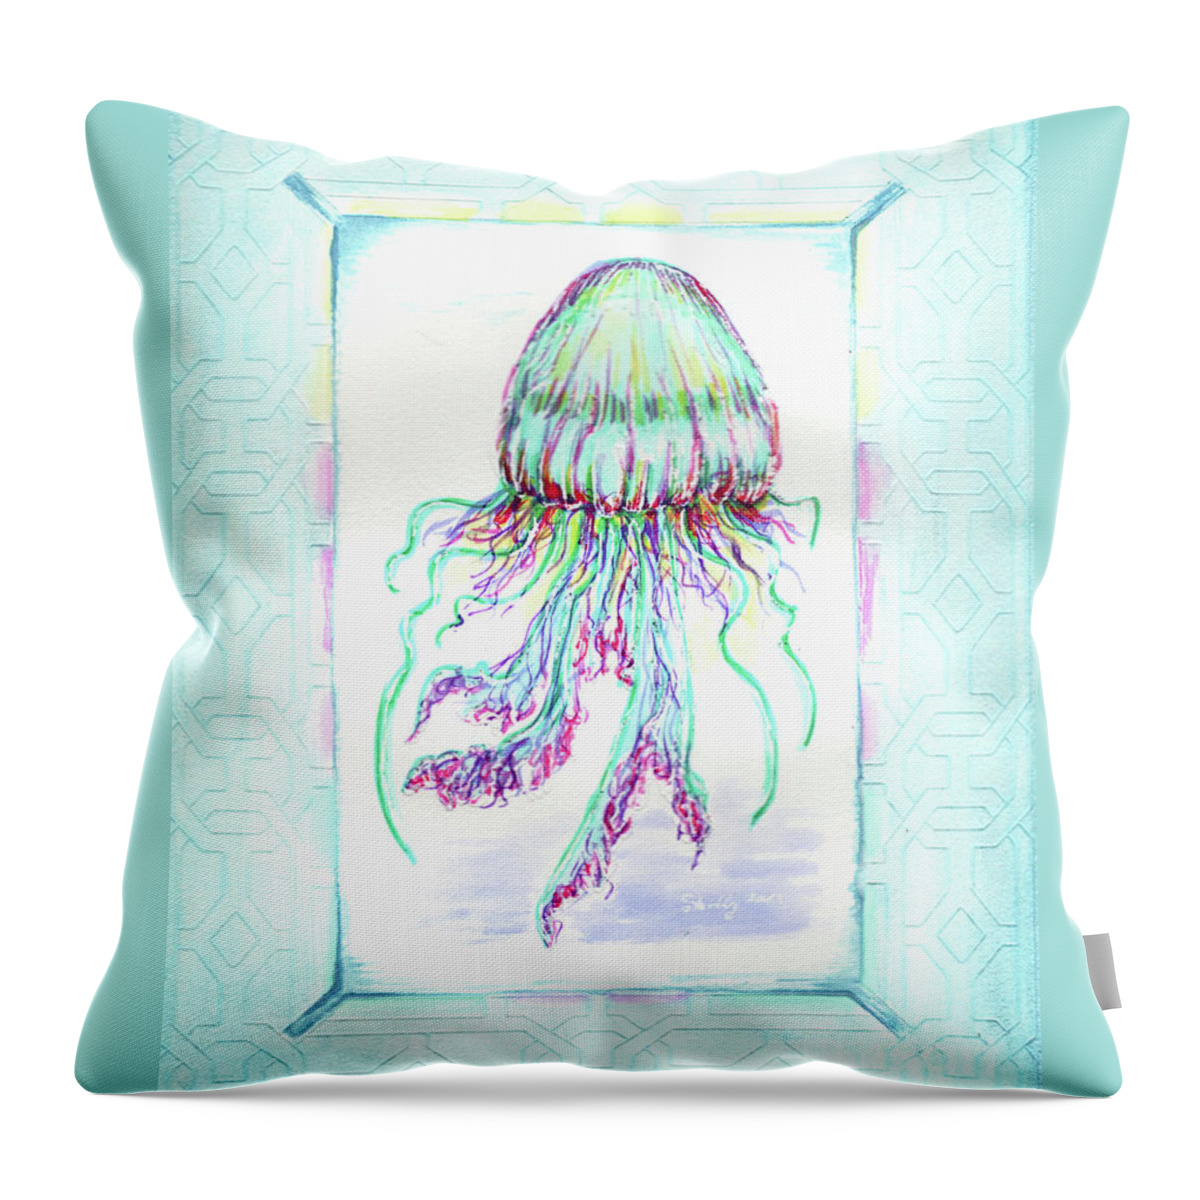 Jellyfish Throw Pillow featuring the painting Jellyfish Key West Teal by Shelly Tschupp